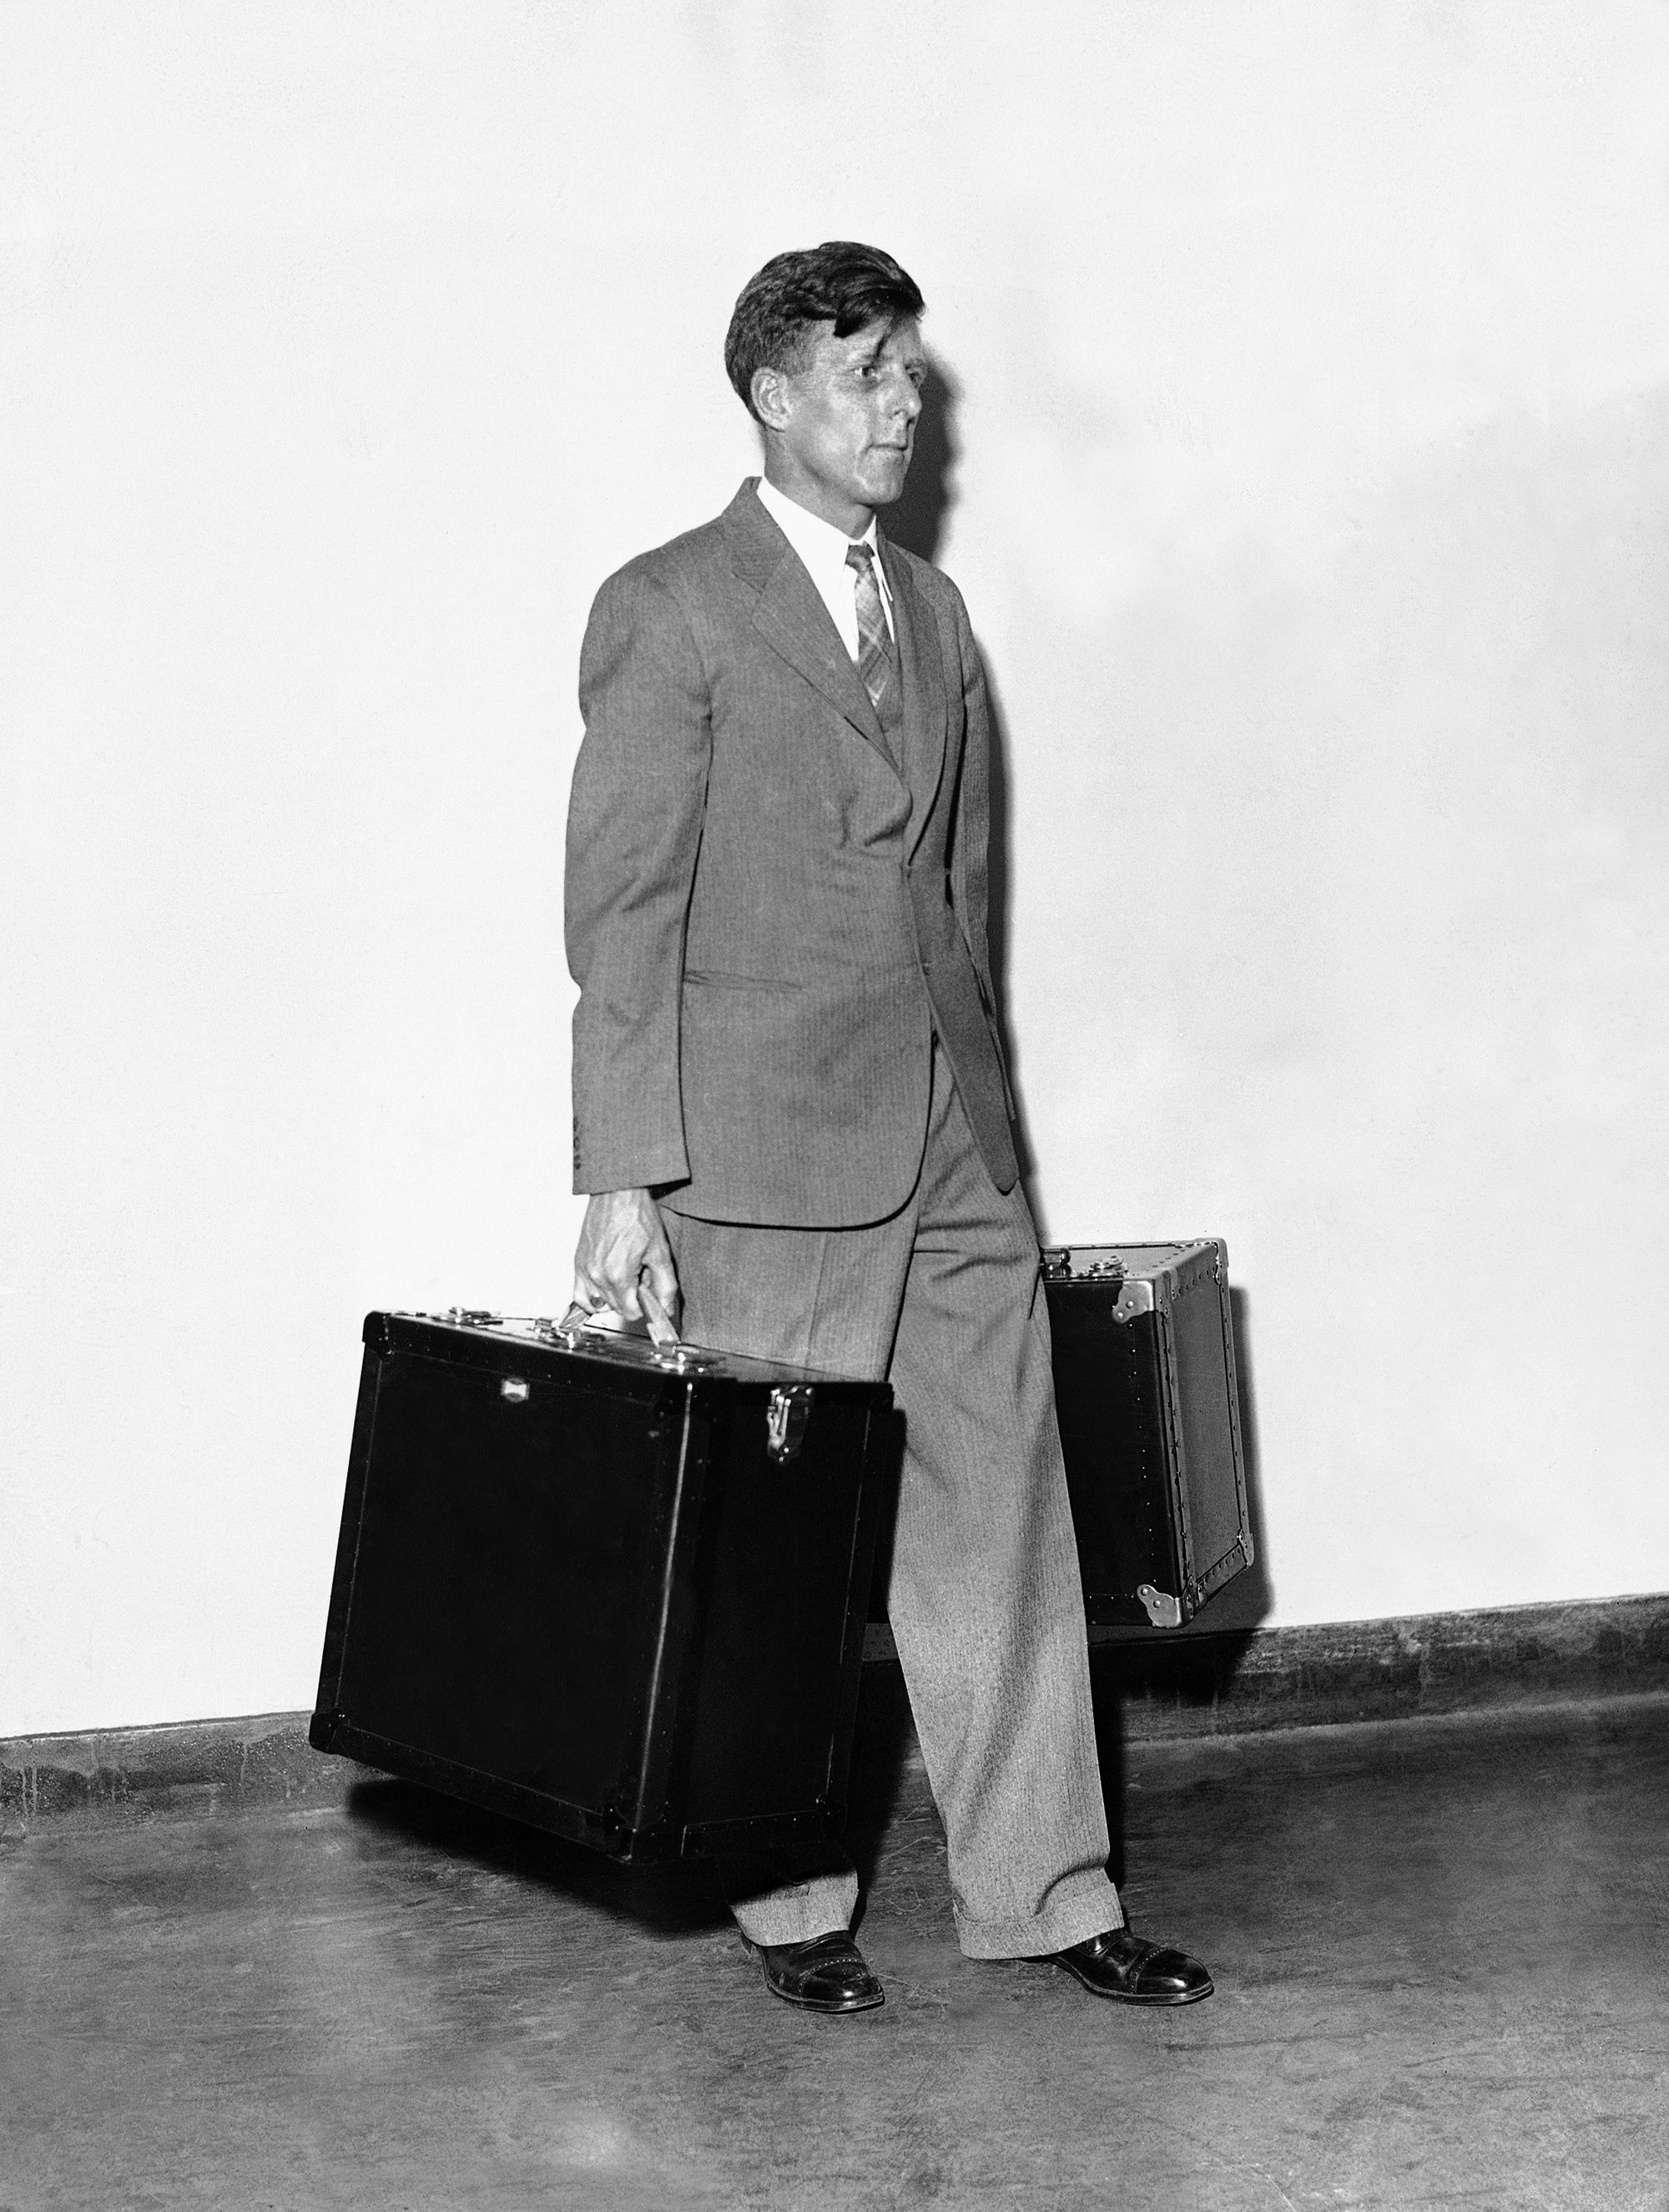 A man carries AP portable WirePhoto transmitter.